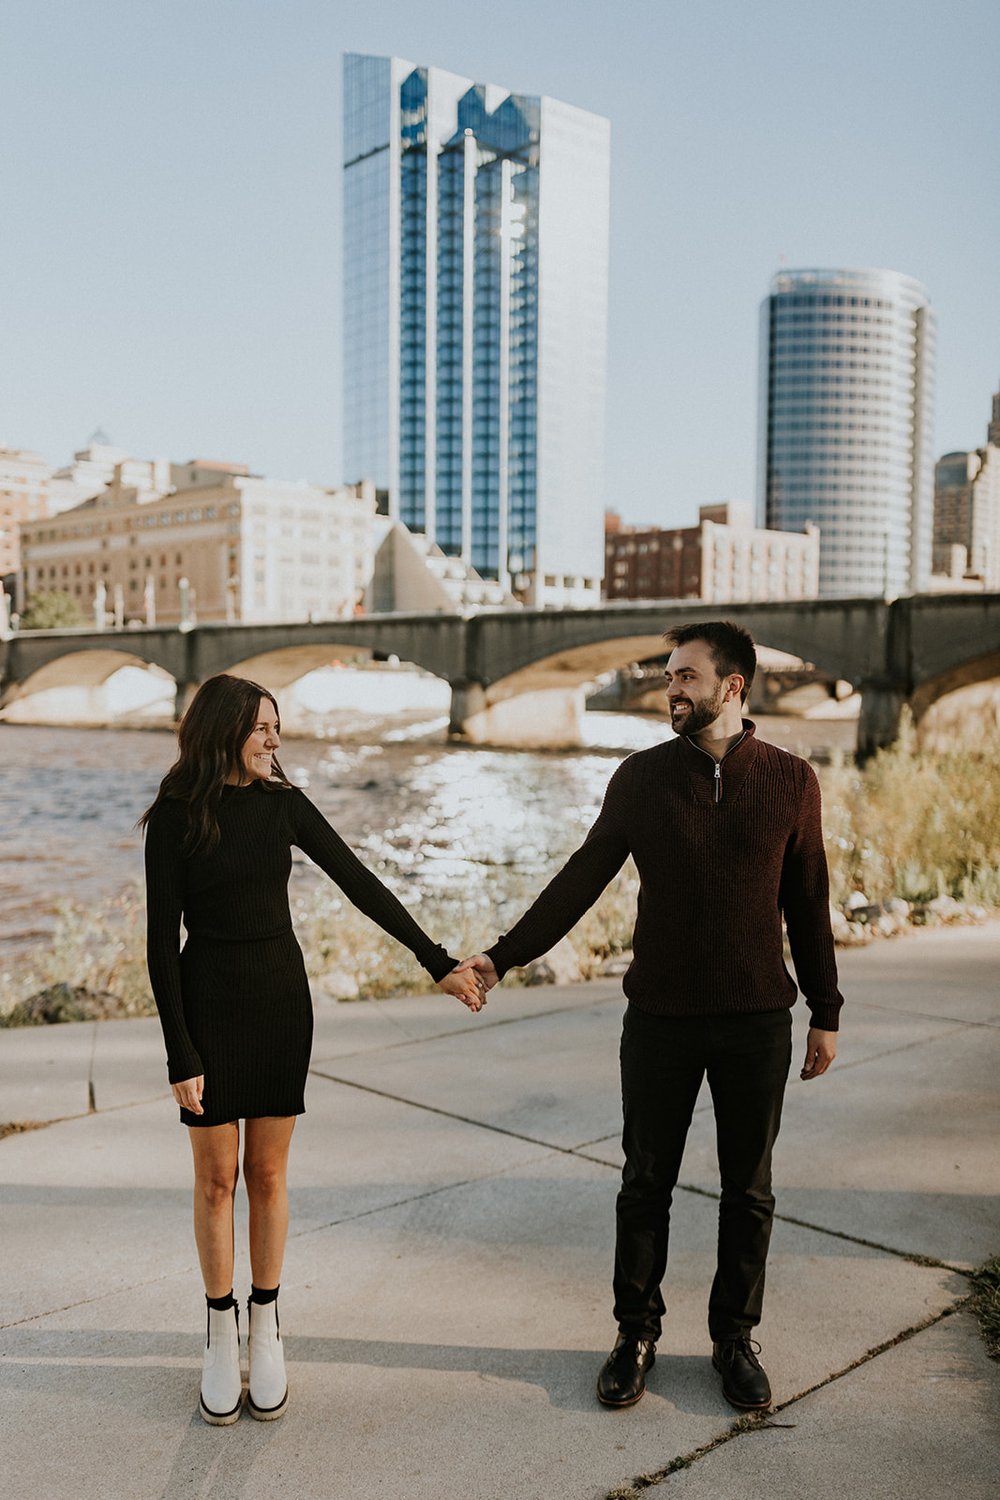  Wondering what to wear for engagement photos? This couple went for dark colors and warm fabrics. 